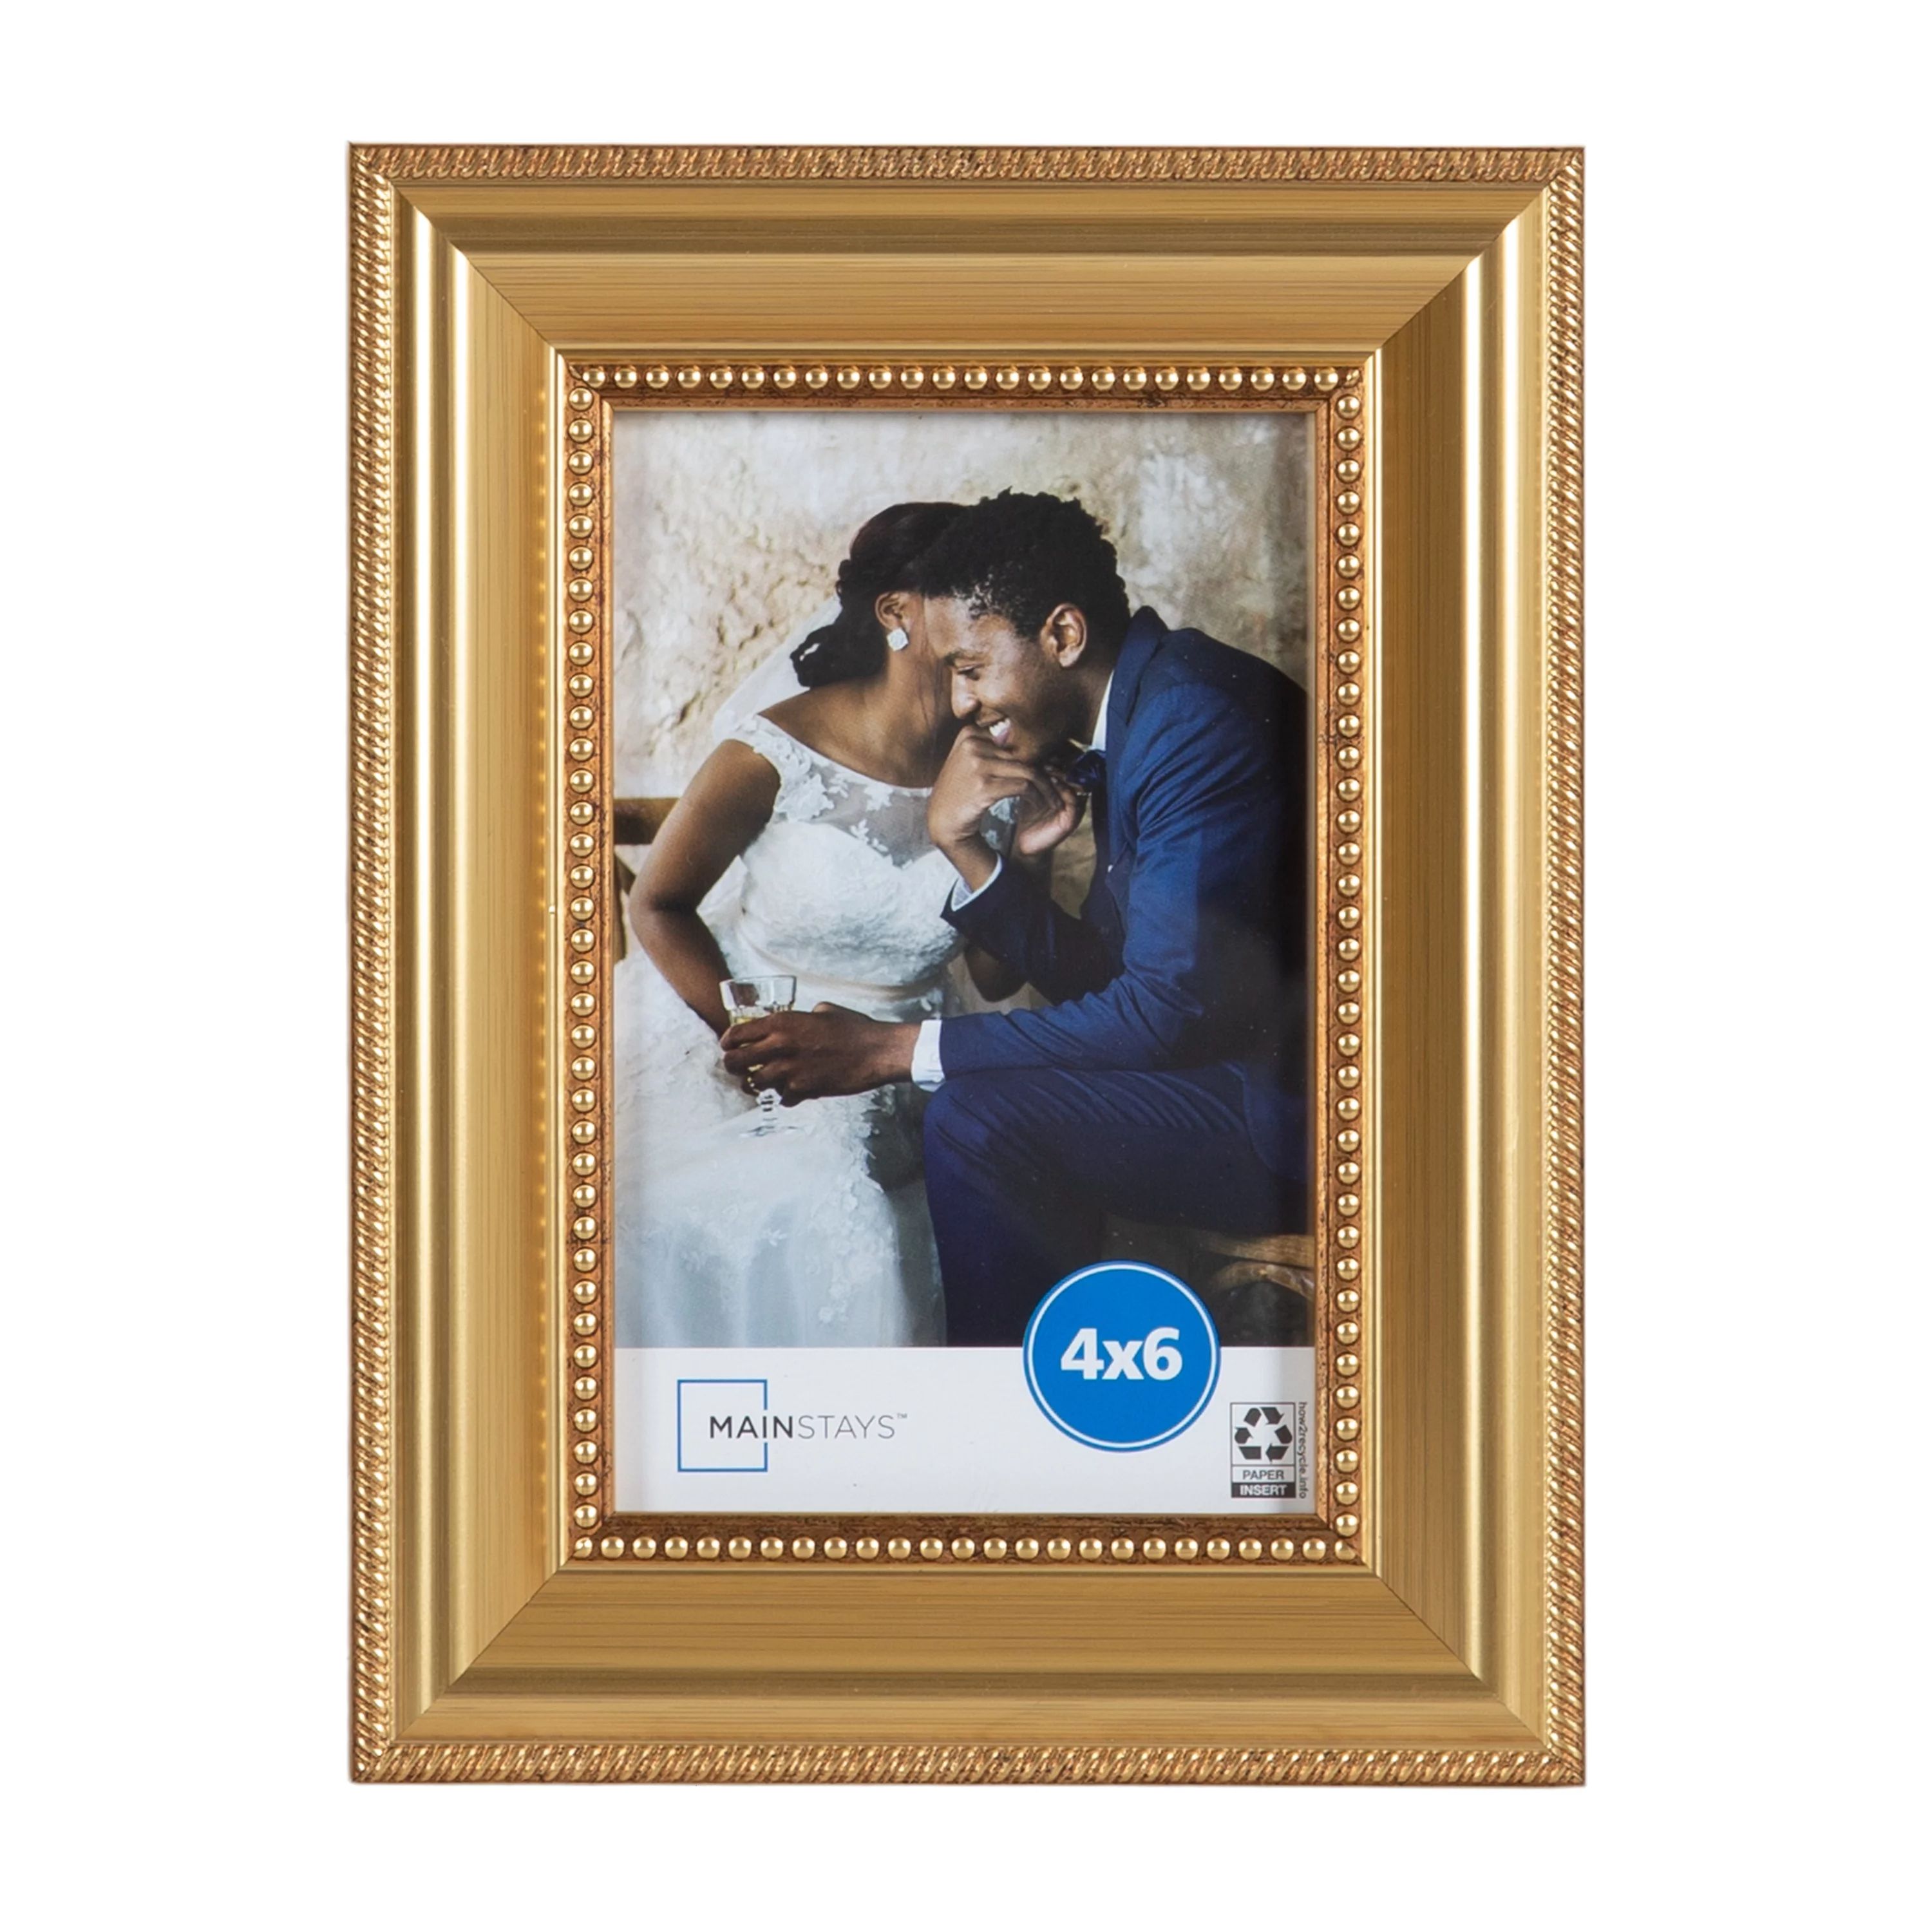 Mainstays 4x6 Yellow Gold Beaded Decorative Tabletop Picture Frame | Walmart (US)